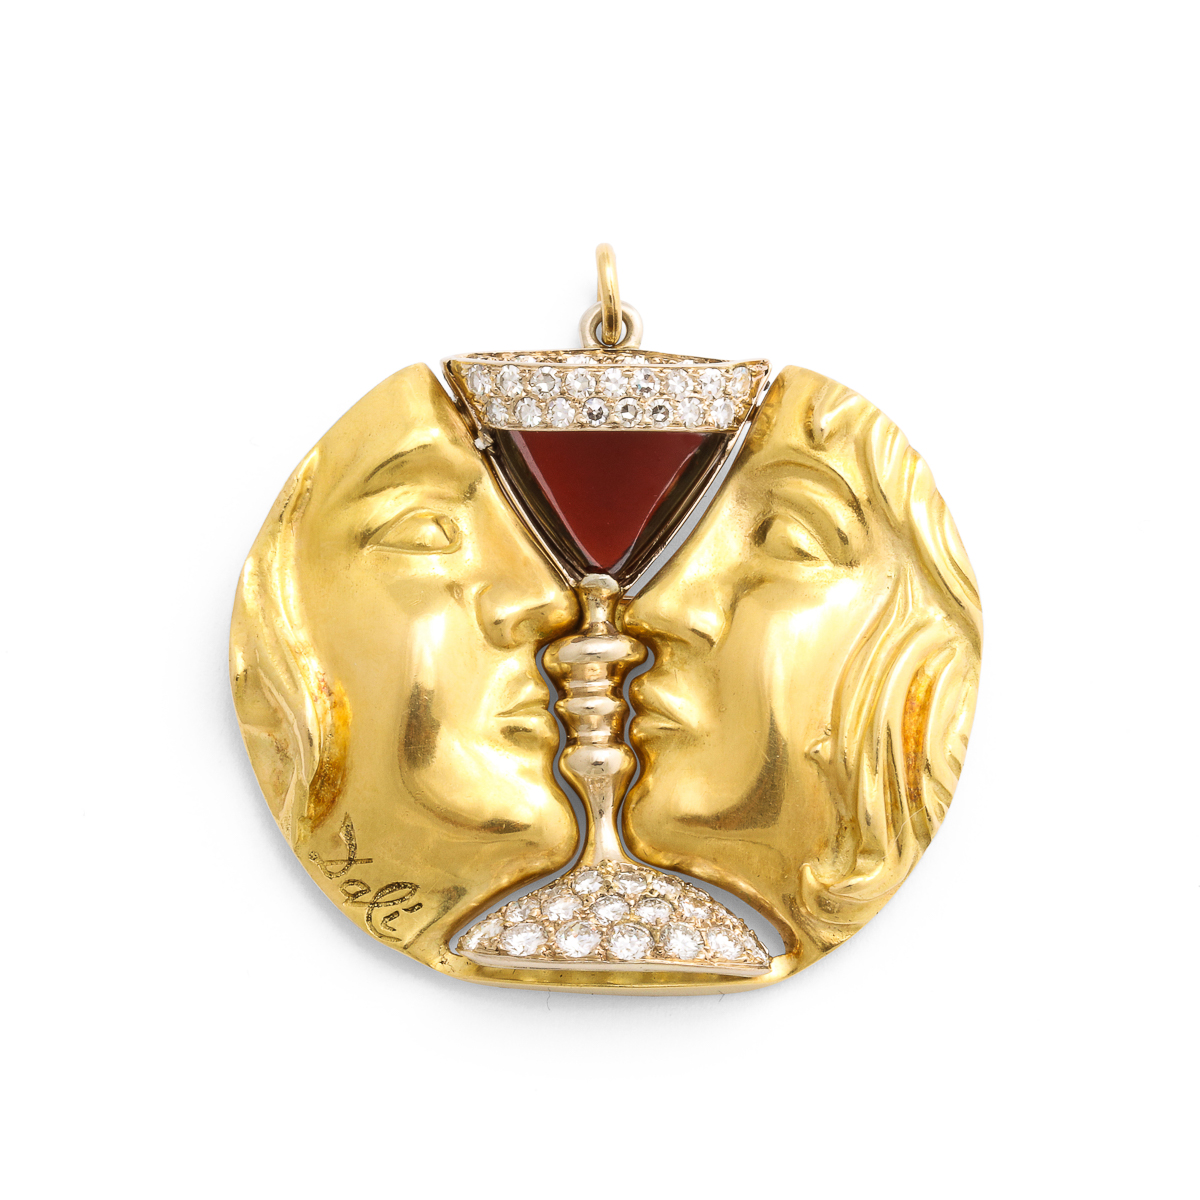 Gold brooch depicting two faces in profile with a diamond and garnet chalice between them